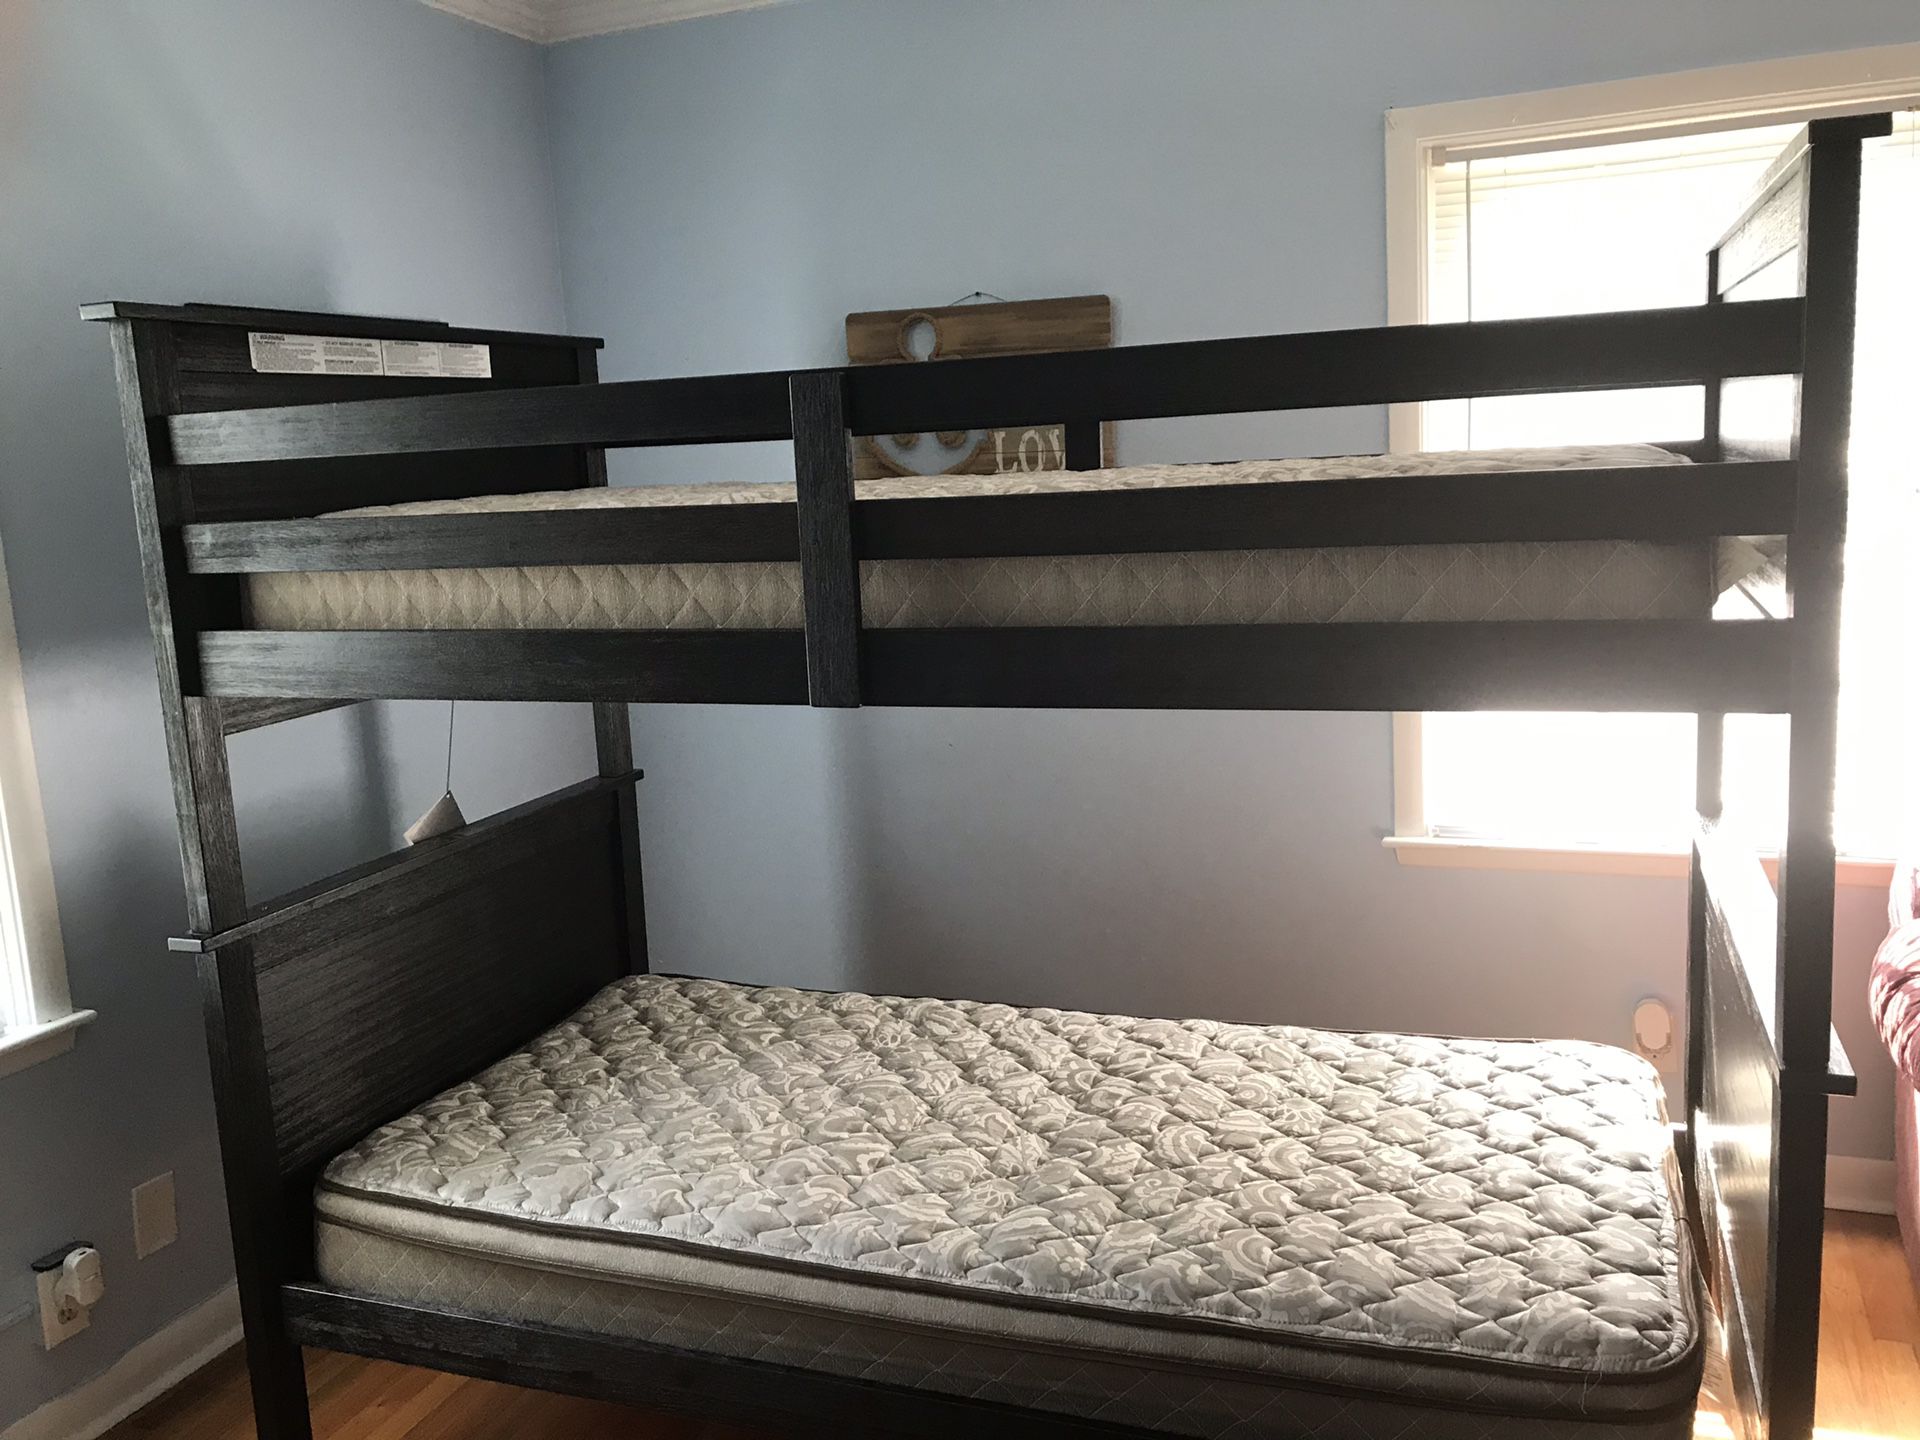 Brand New Bunk bed and single twin bed $350 EACH Includes mattress New